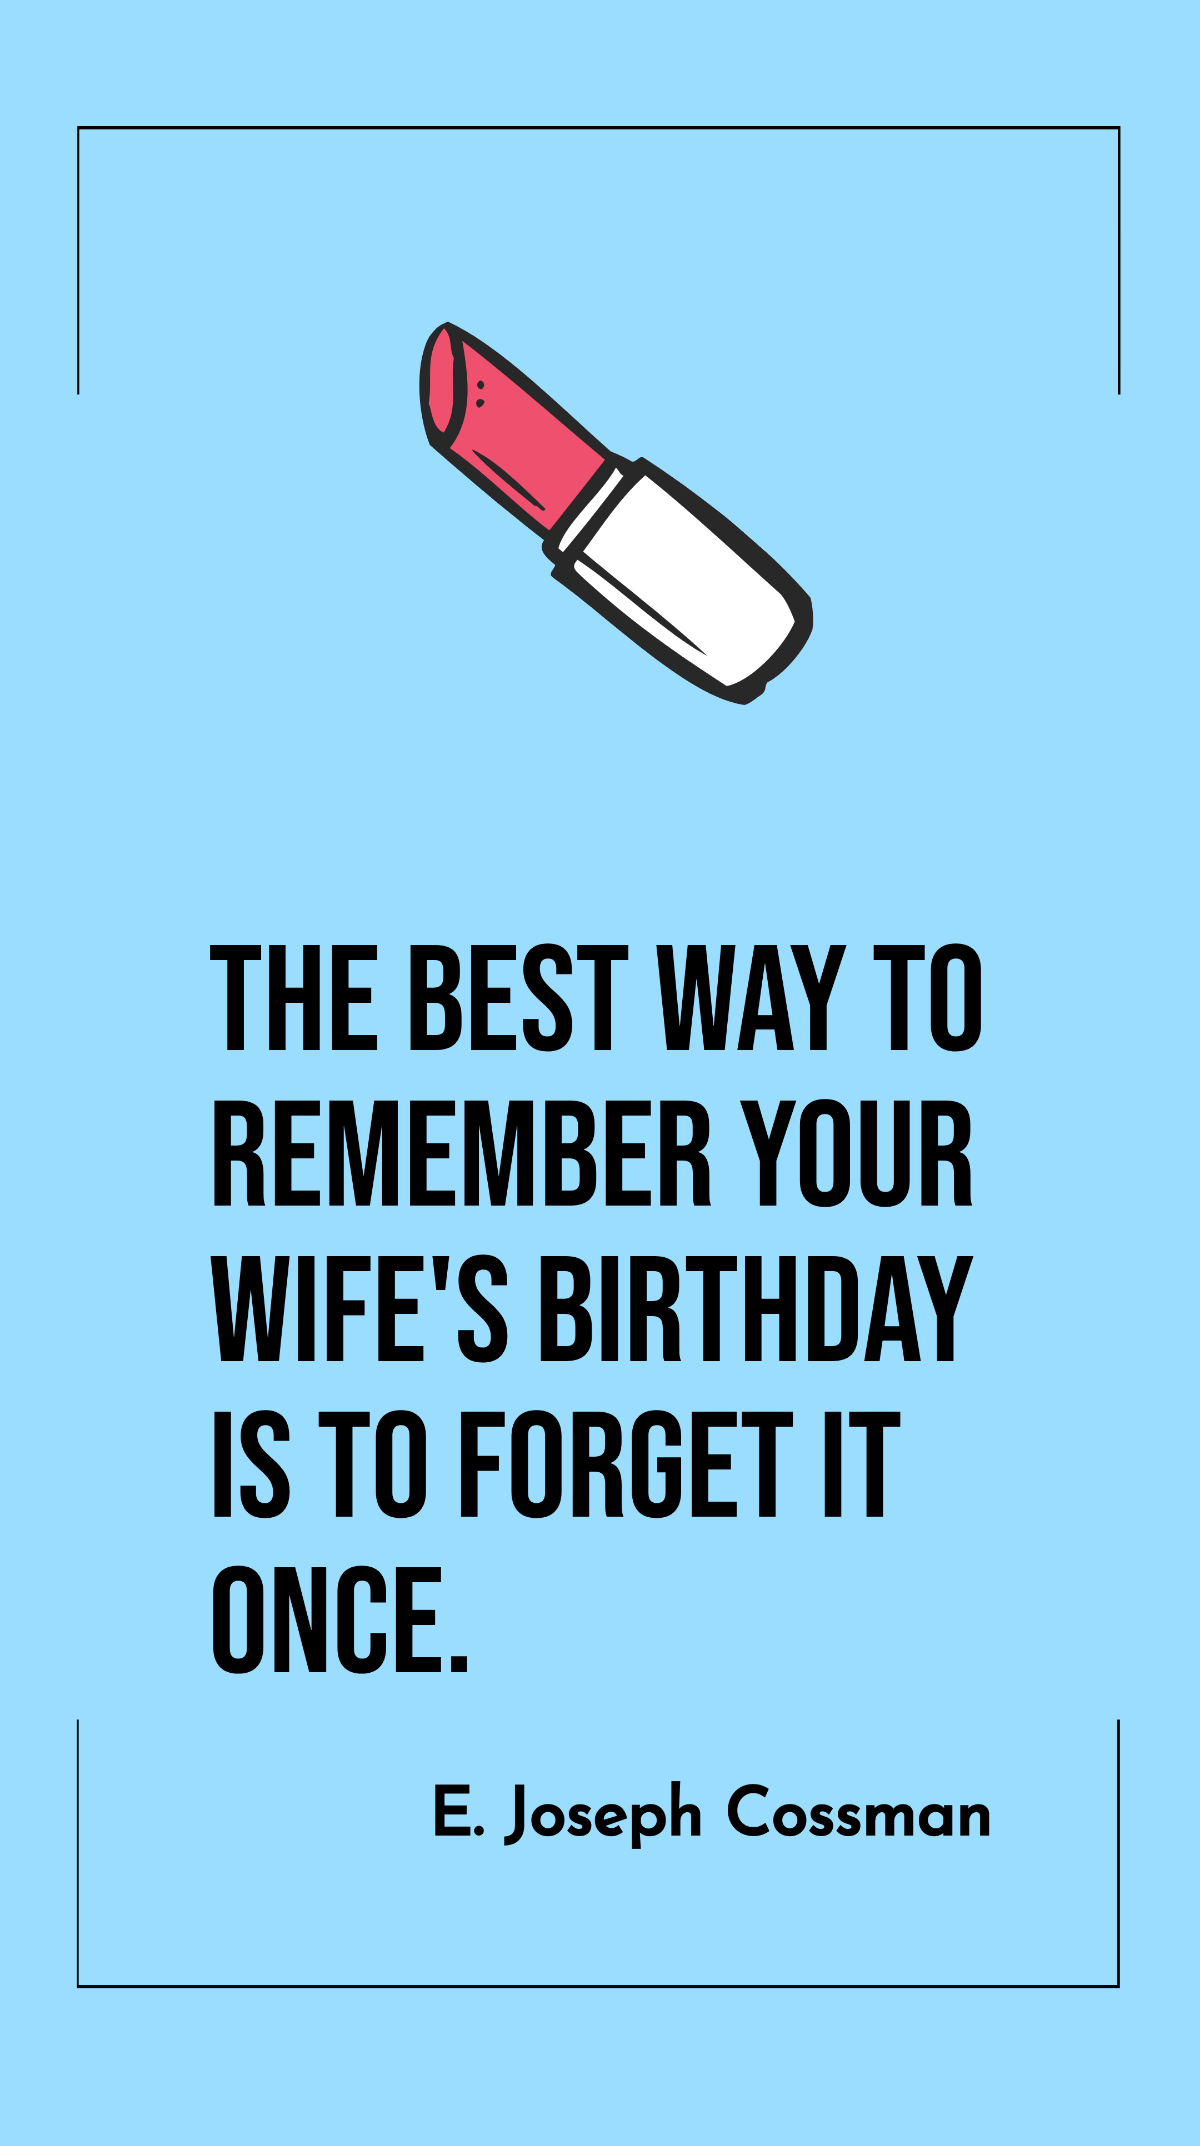 E. Joseph Cossman - The best way to remember your wife's birthday is to forget it once.